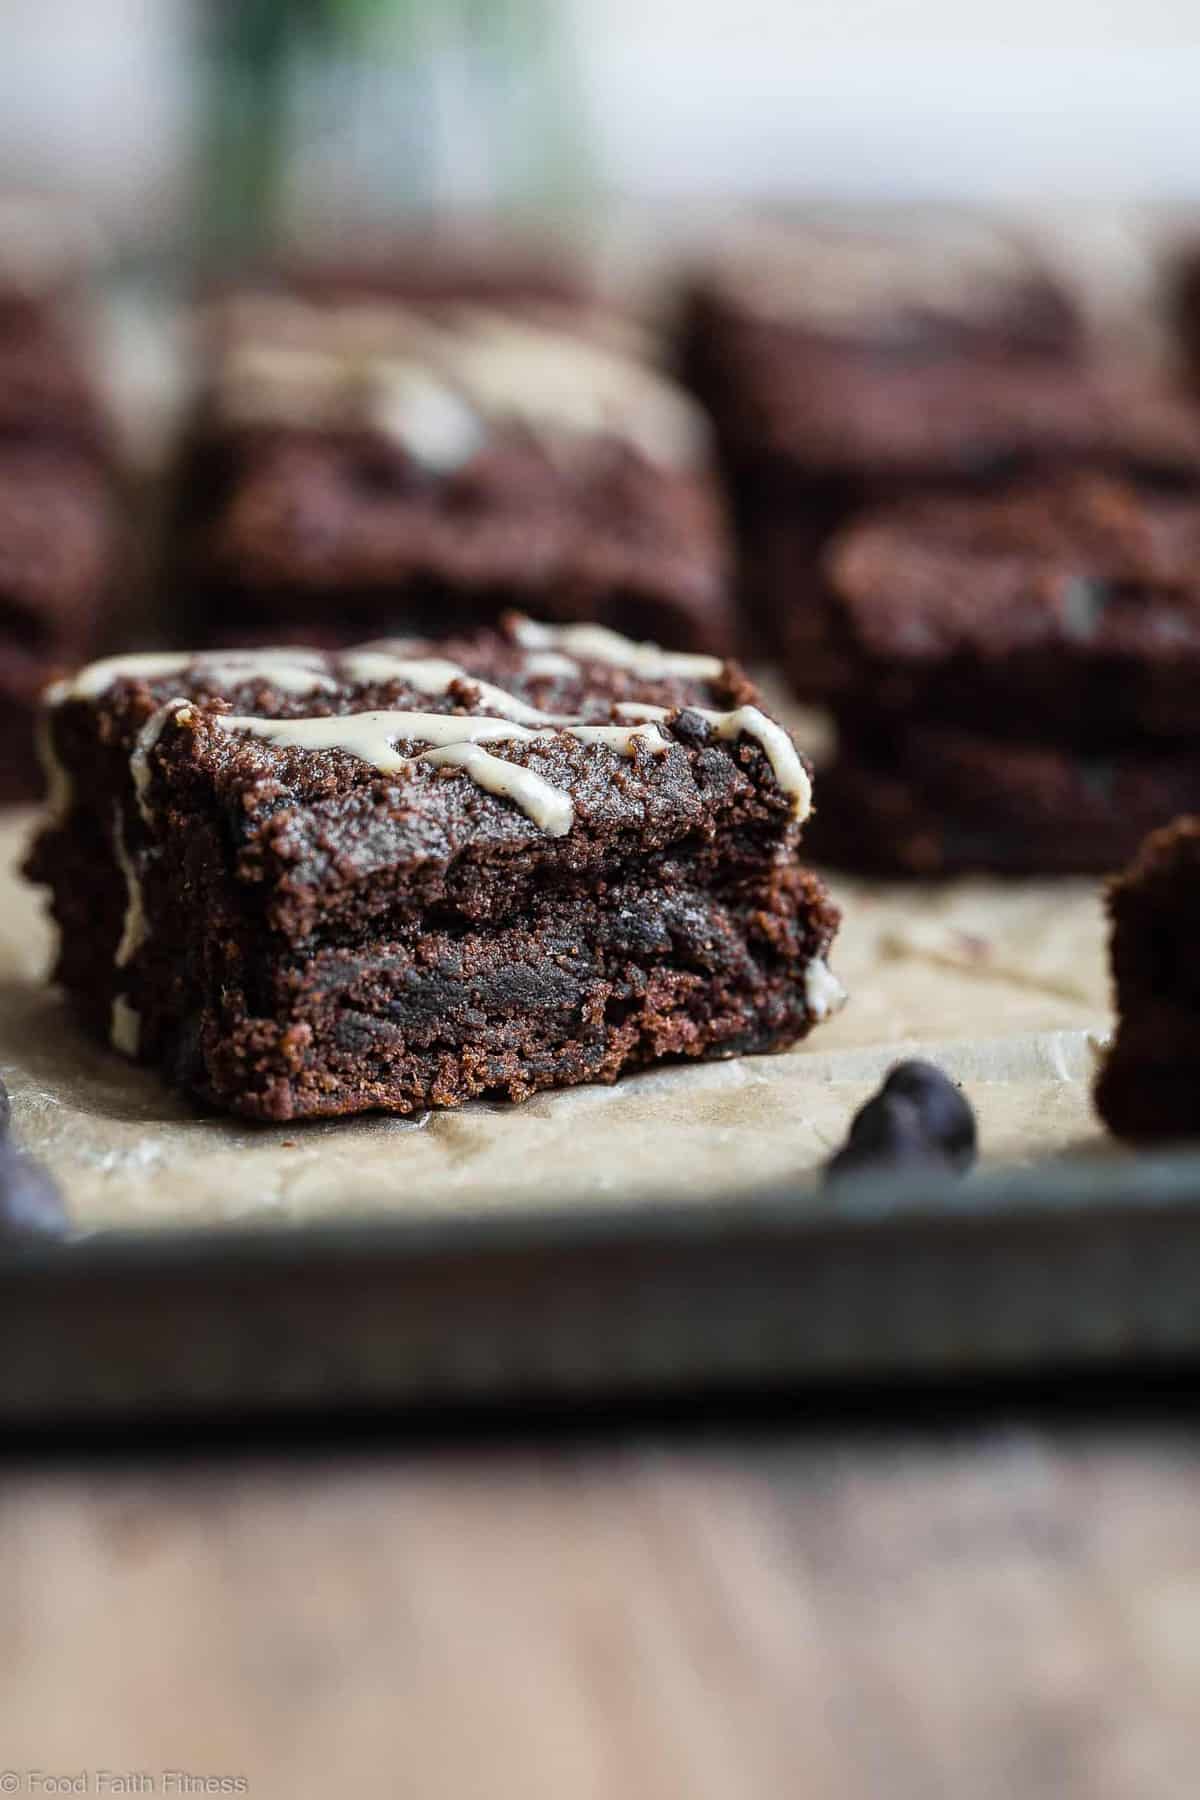 Paleo Sweet Potato Brownies - These healthy brownies are SO dense, chewy and moist! No one will believe they use sweet potato and are gluten/grain/dairy and refined sugar free! | #Foodfaithfitness | #Paleo #Glutenfree #Healthy #Brownies #Grainfree